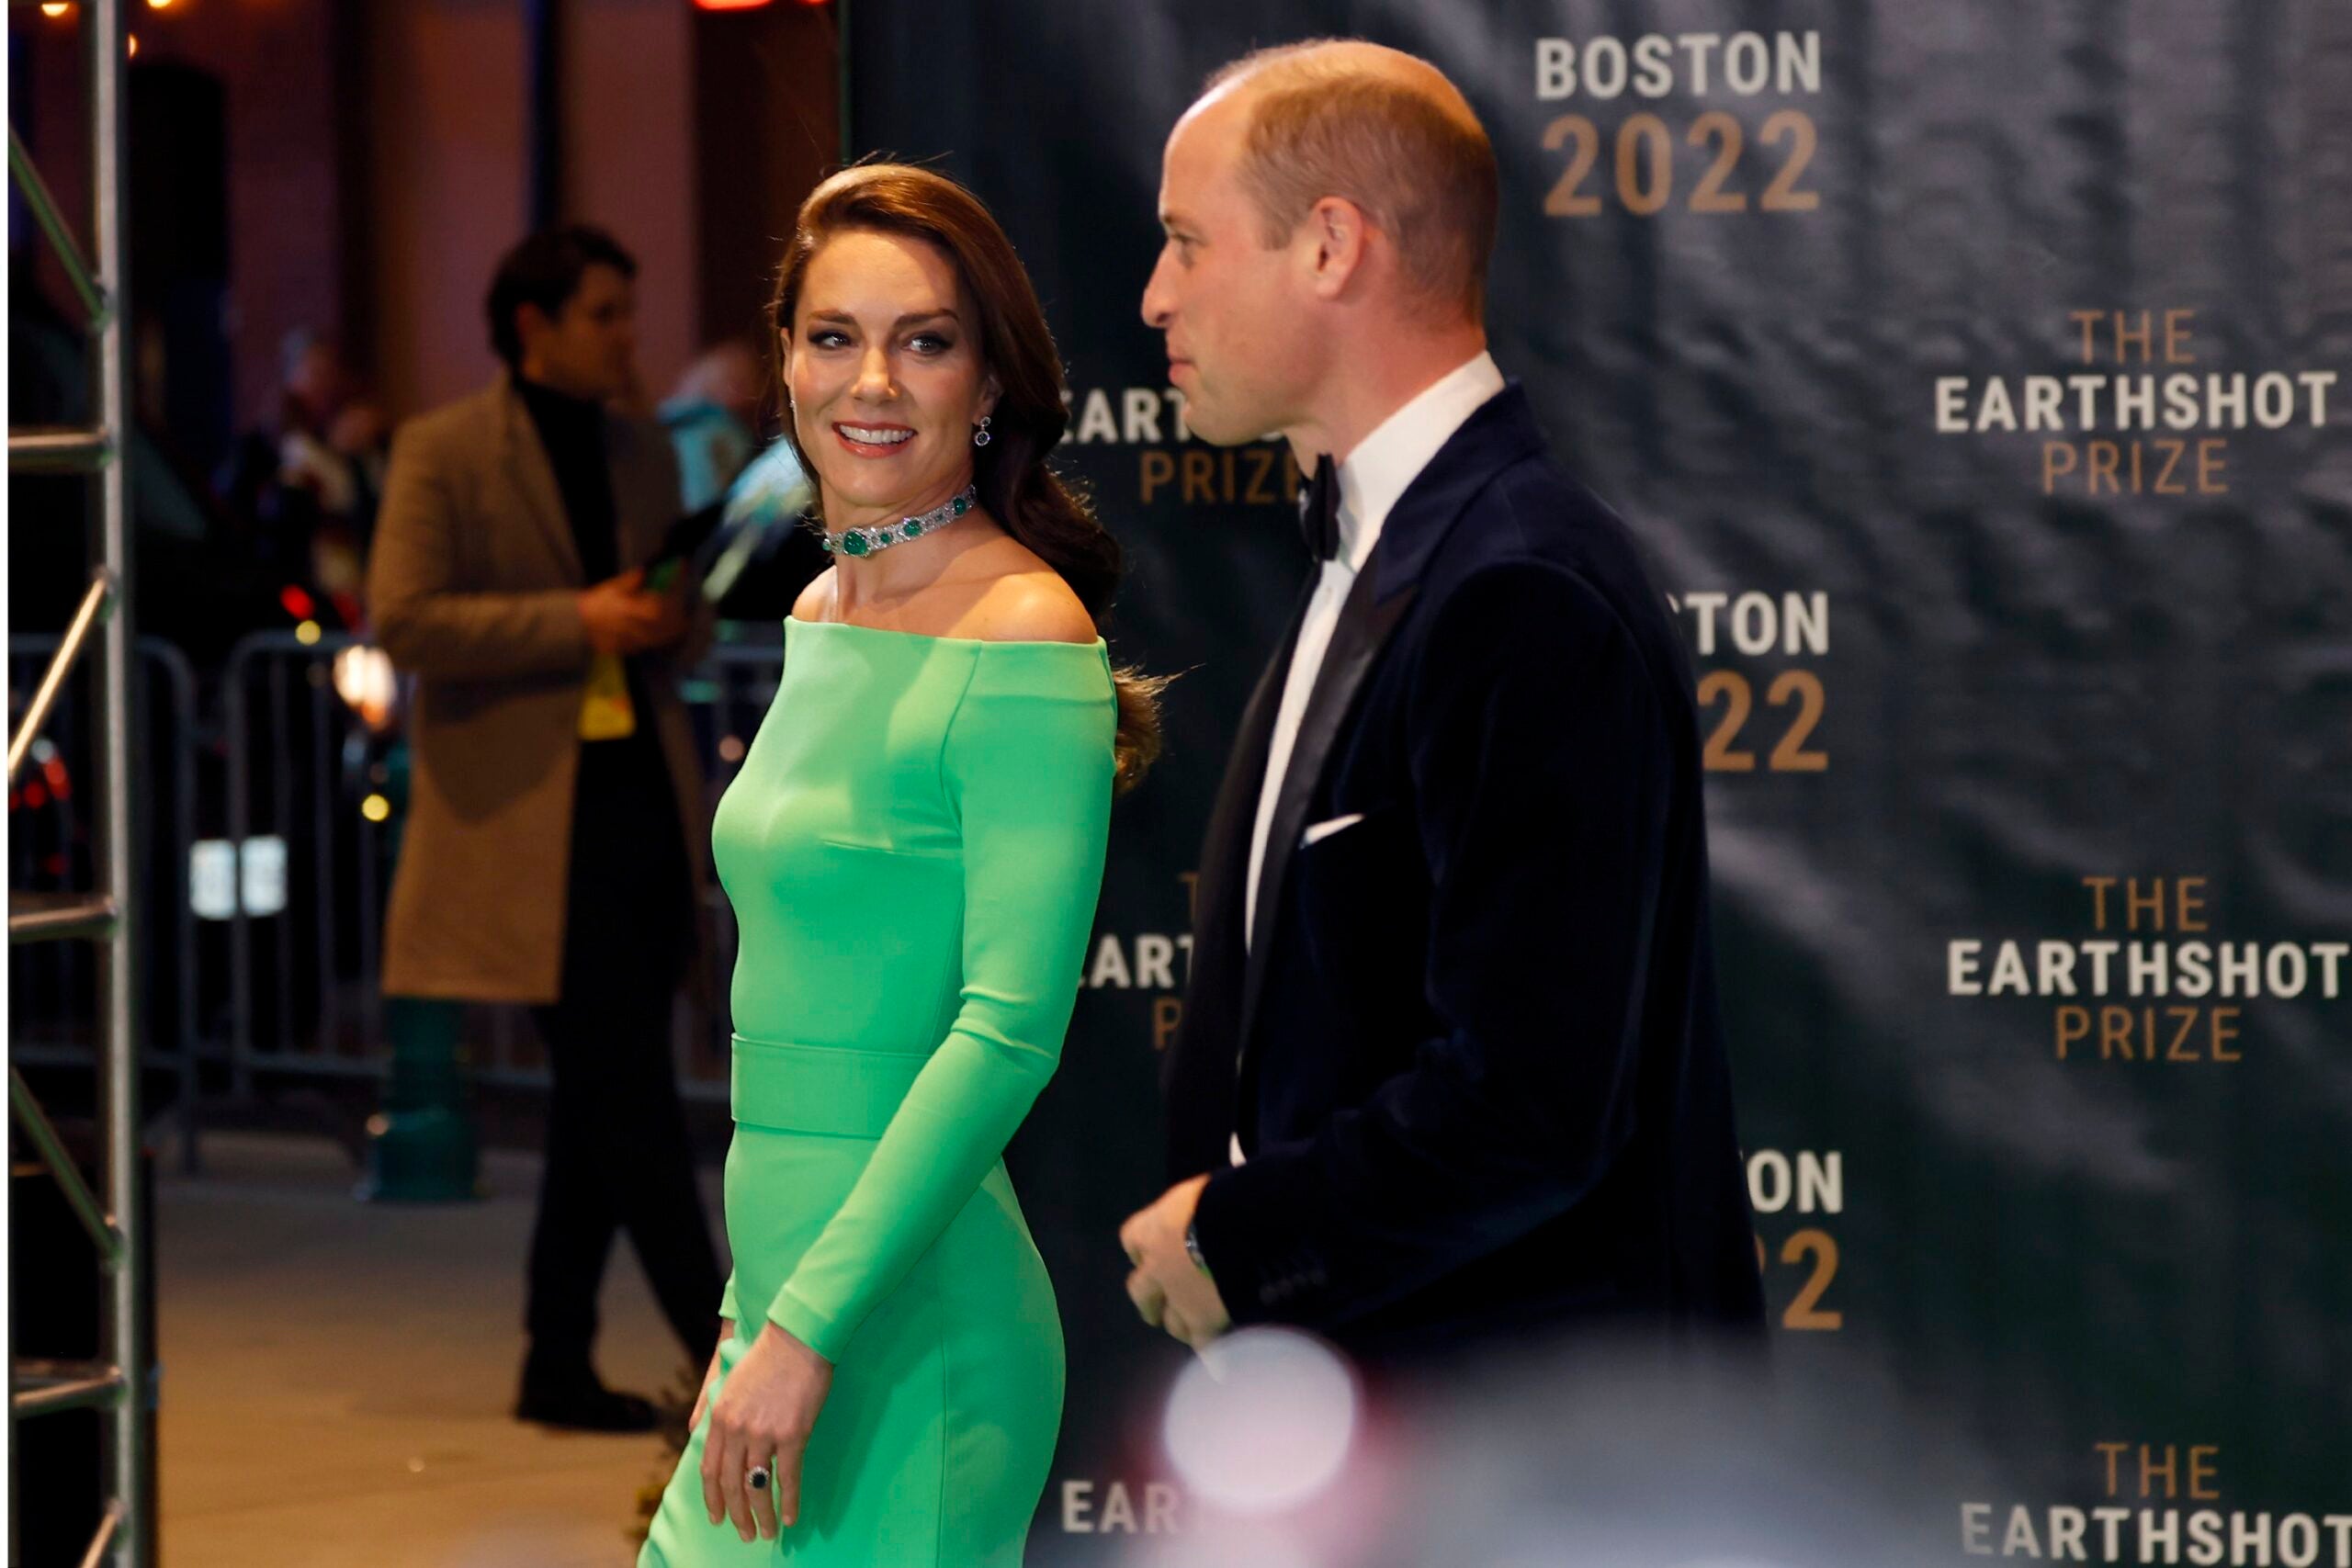 Britain's Prince William and Kate, Princess of Wales arrive for the the second annual Earthshot Prize Awards Ceremony at the MGM Music Hall, Friday, Dec. 2, 2022, in Boston.